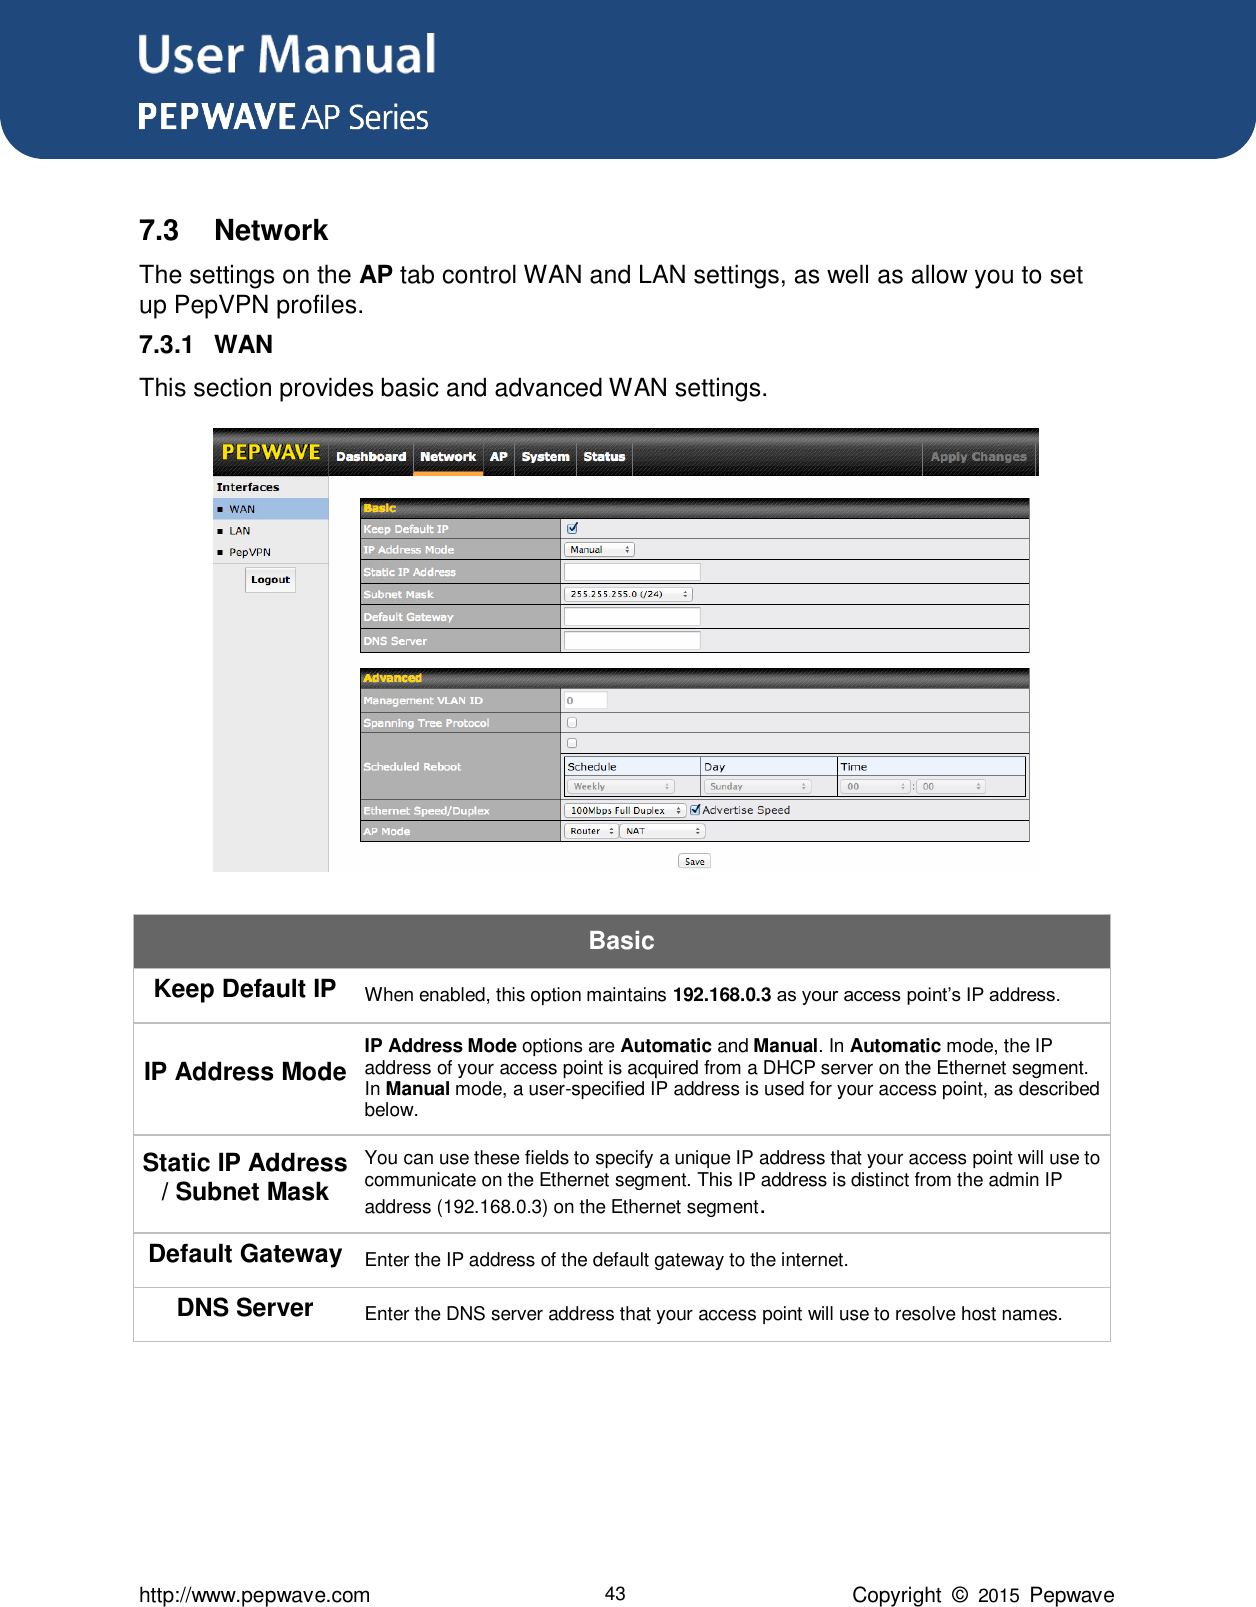 User Manual      http://www.pepwave.com 43 Copyright  ©  2015  Pepwave  7.3  Network The settings on the AP tab control WAN and LAN settings, as well as allow you to set up PepVPN profiles. 7.3.1  WAN This section provides basic and advanced WAN settings.  Basic Keep Default IP When enabled, this option maintains 192.168.0.3 as your access point’s IP address. IP Address Mode IP Address Mode options are Automatic and Manual. In Automatic mode, the IP address of your access point is acquired from a DHCP server on the Ethernet segment. In Manual mode, a user-specified IP address is used for your access point, as described below. Static IP Address / Subnet Mask You can use these fields to specify a unique IP address that your access point will use to communicate on the Ethernet segment. This IP address is distinct from the admin IP address (192.168.0.3) on the Ethernet segment. Default Gateway Enter the IP address of the default gateway to the internet.   DNS Server Enter the DNS server address that your access point will use to resolve host names.     